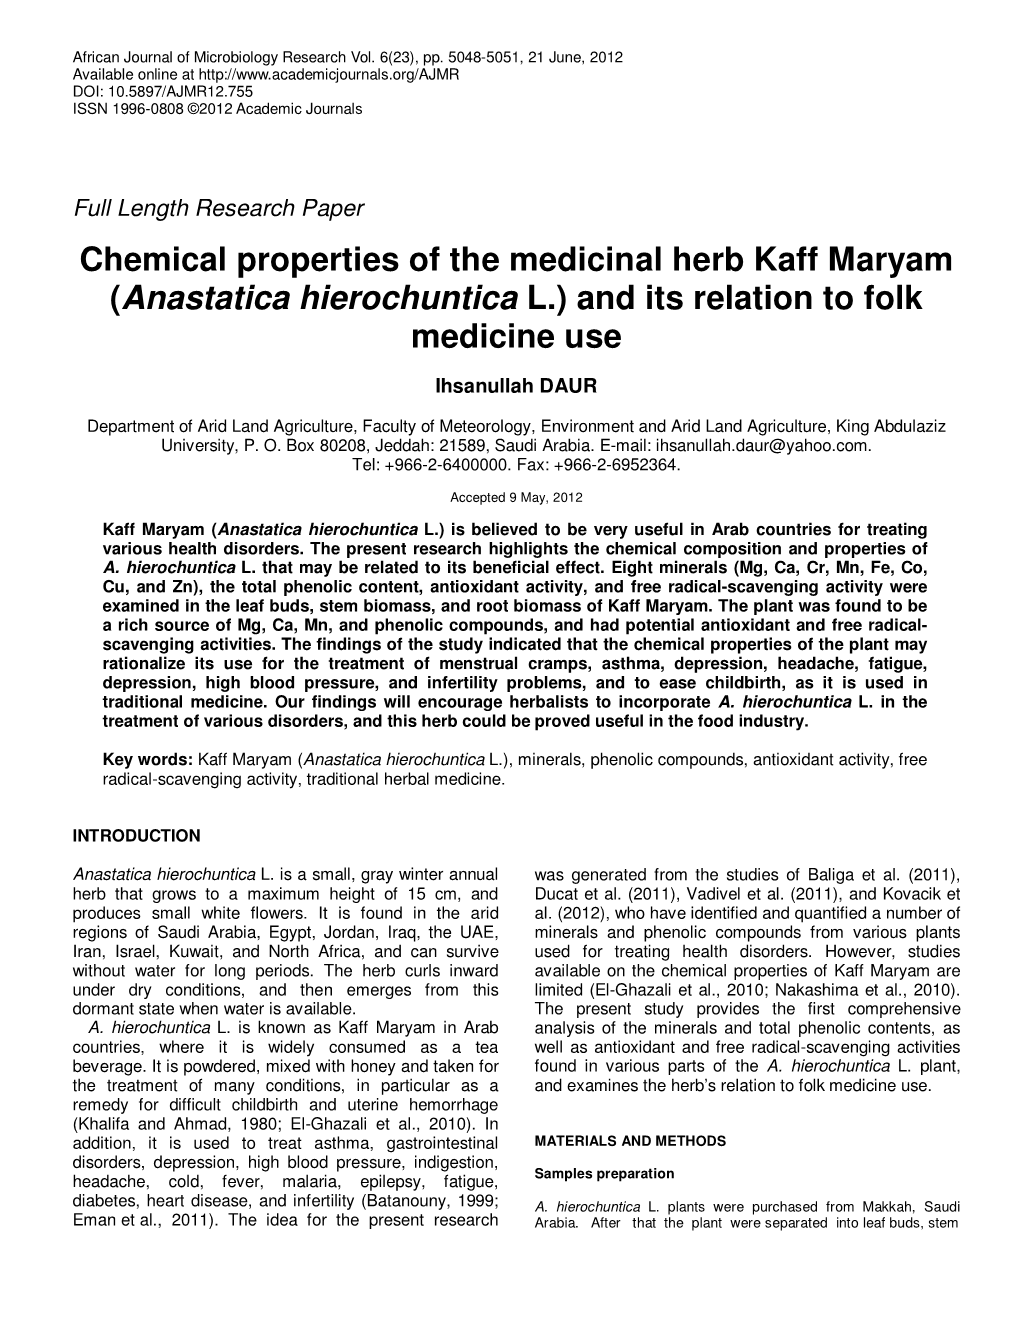 Chemical Properties of the Medicinal Herb Kaff Maryam (Anastatica Hierochuntica L.) and Its Relation to Folk Medicine Use